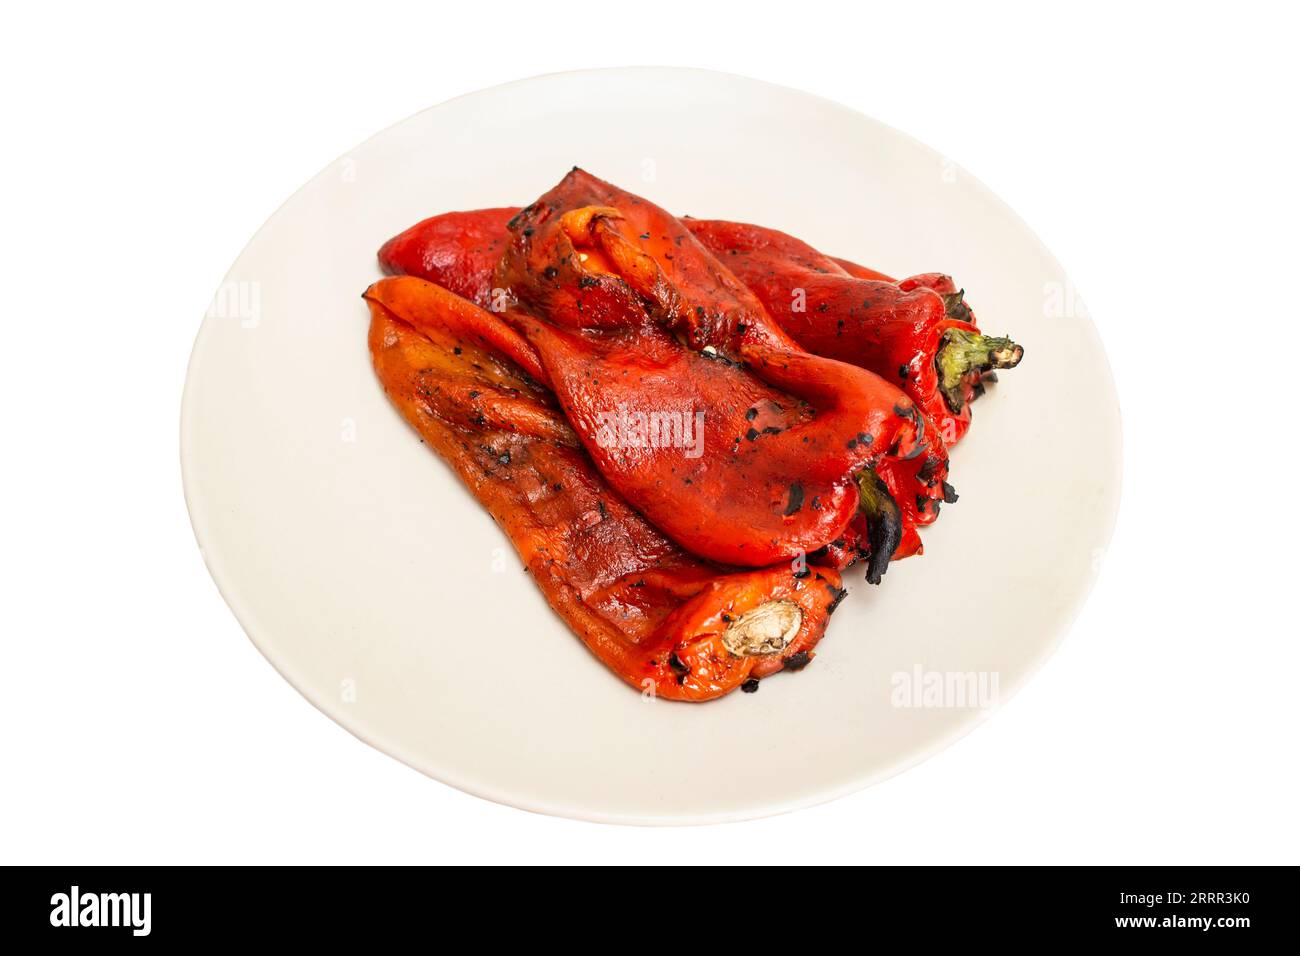 grilled roasted and peeled red peppers on a ceramic plate isolated on white background Stock Photo